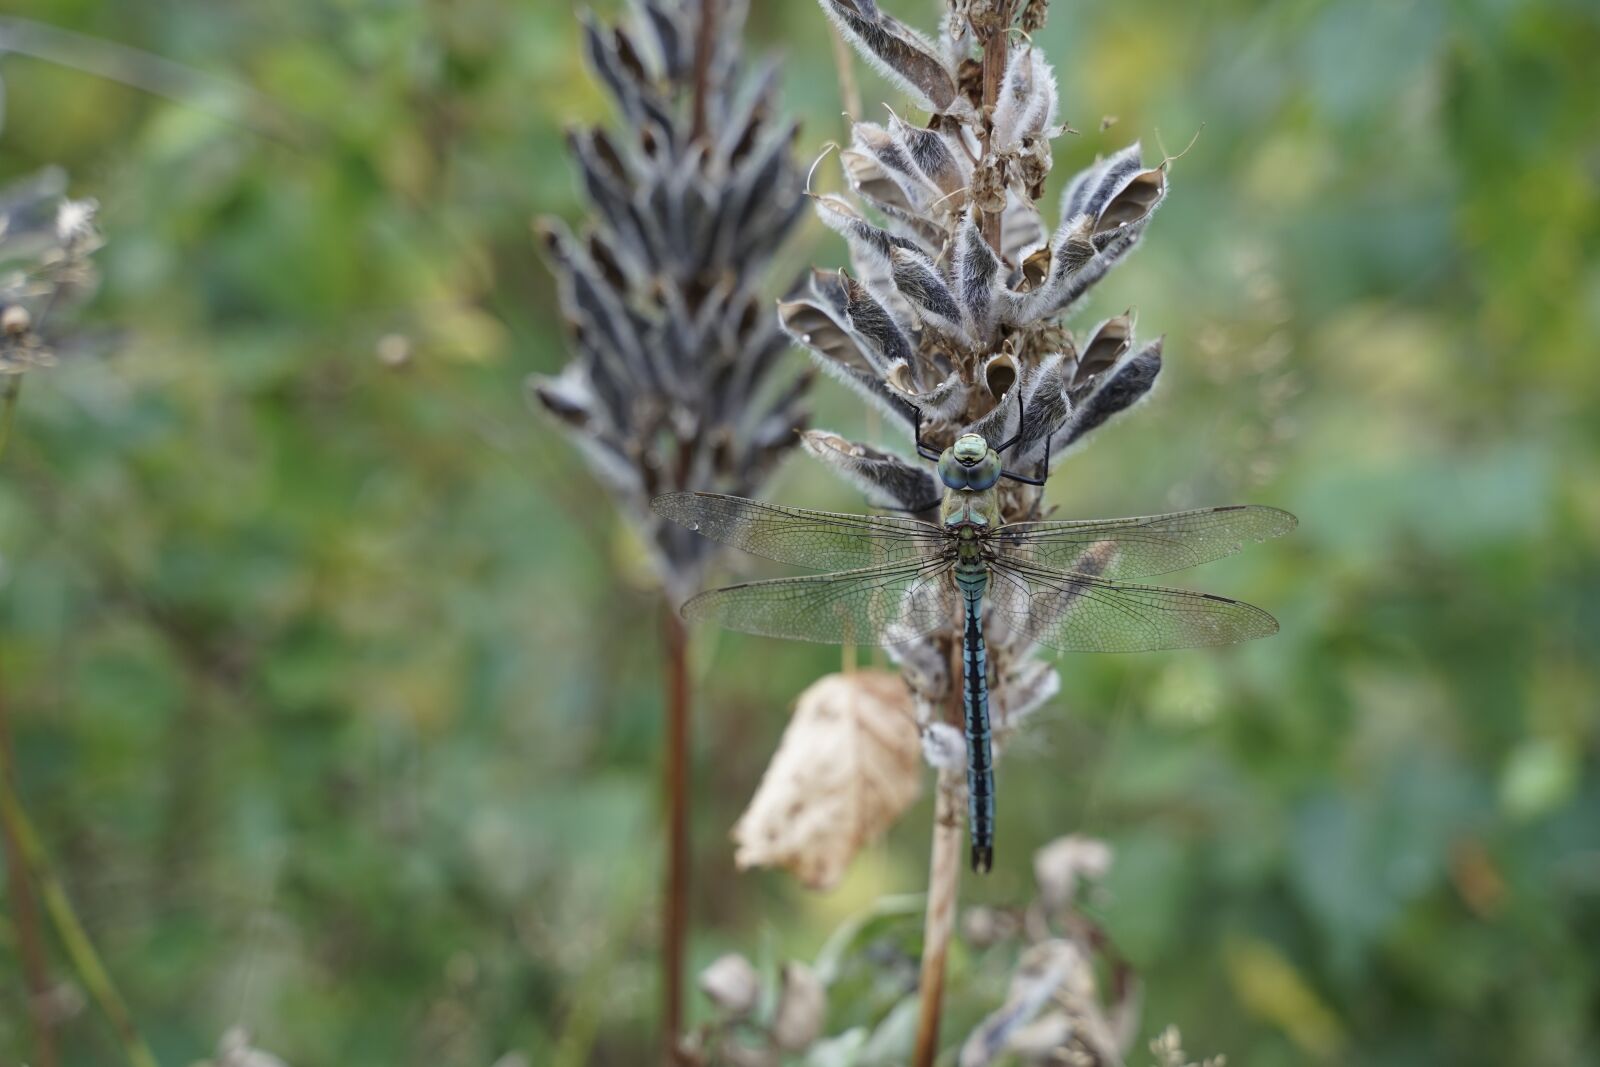 Sony a7 III sample photo. Dragonfly, insect, nature photography